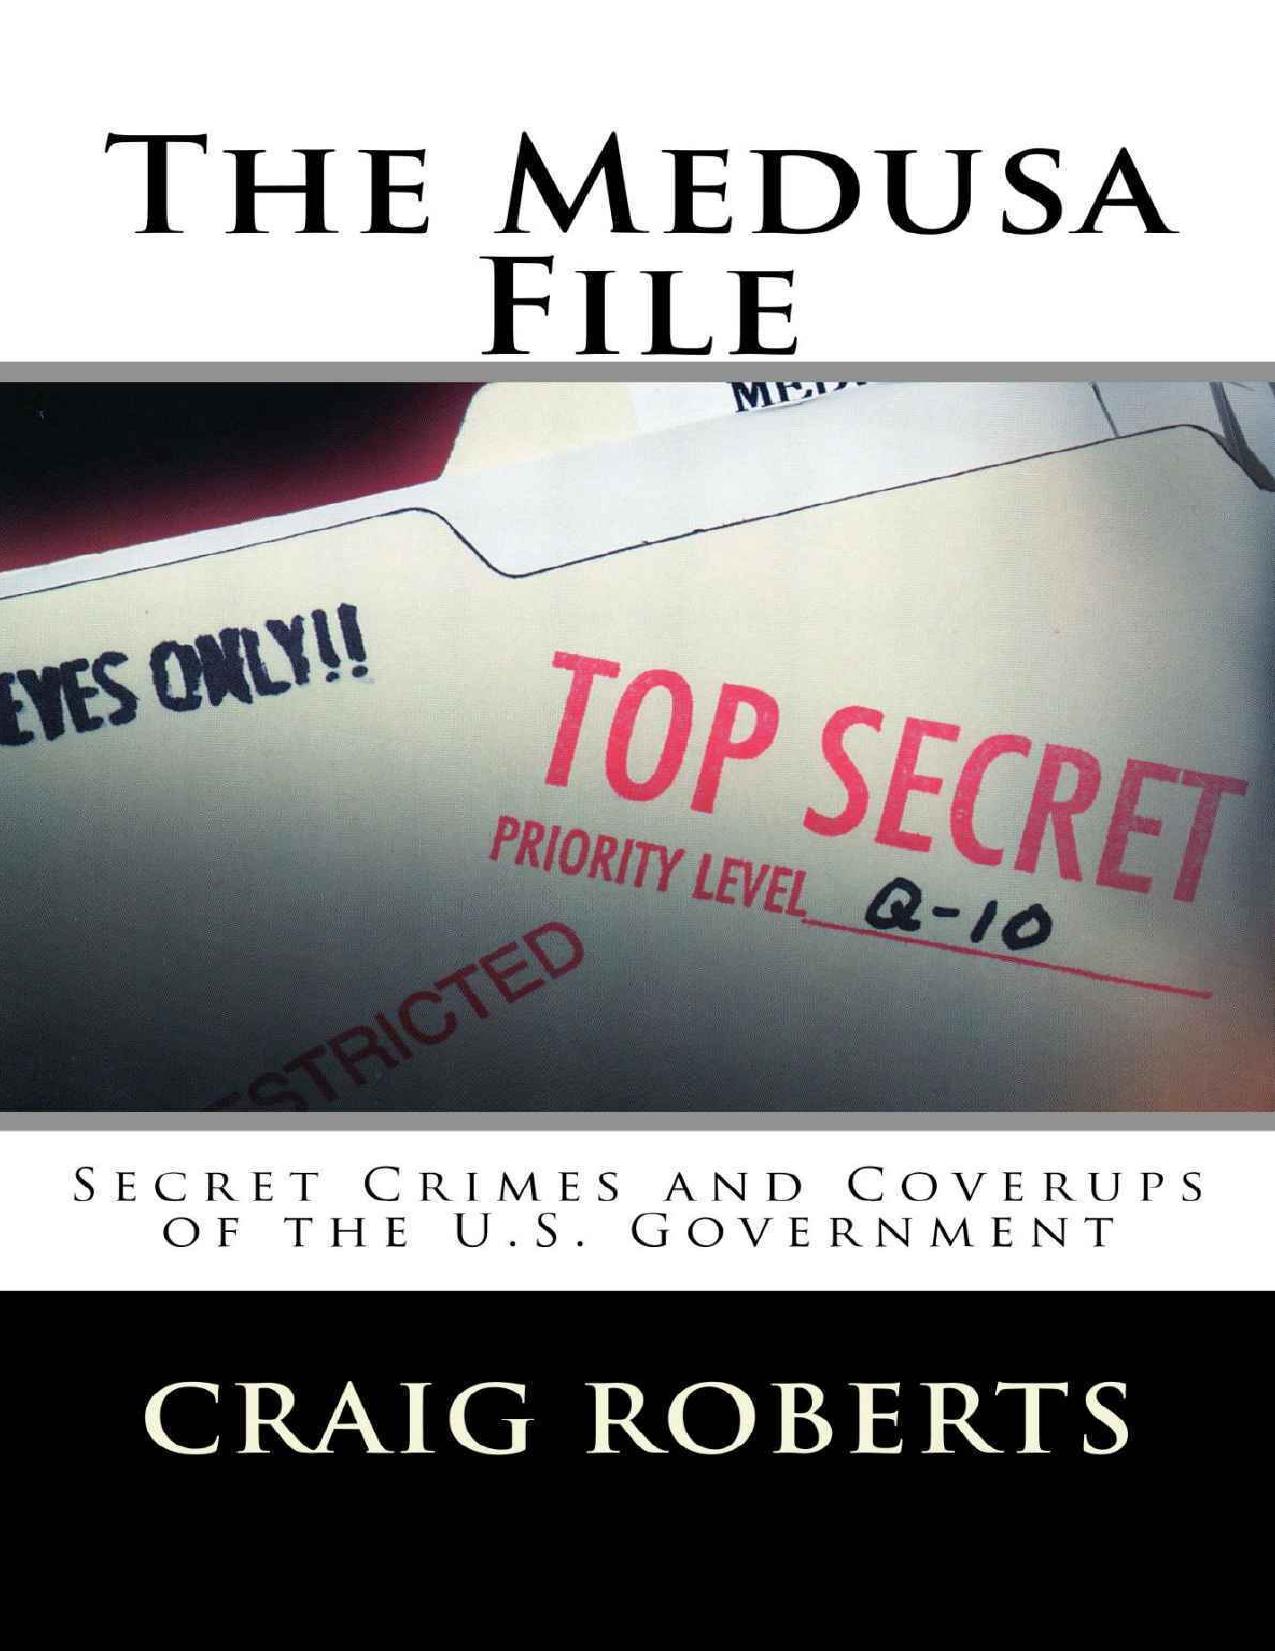 The Medusa File: Secret Crimes and Coverups of the U. S. Government